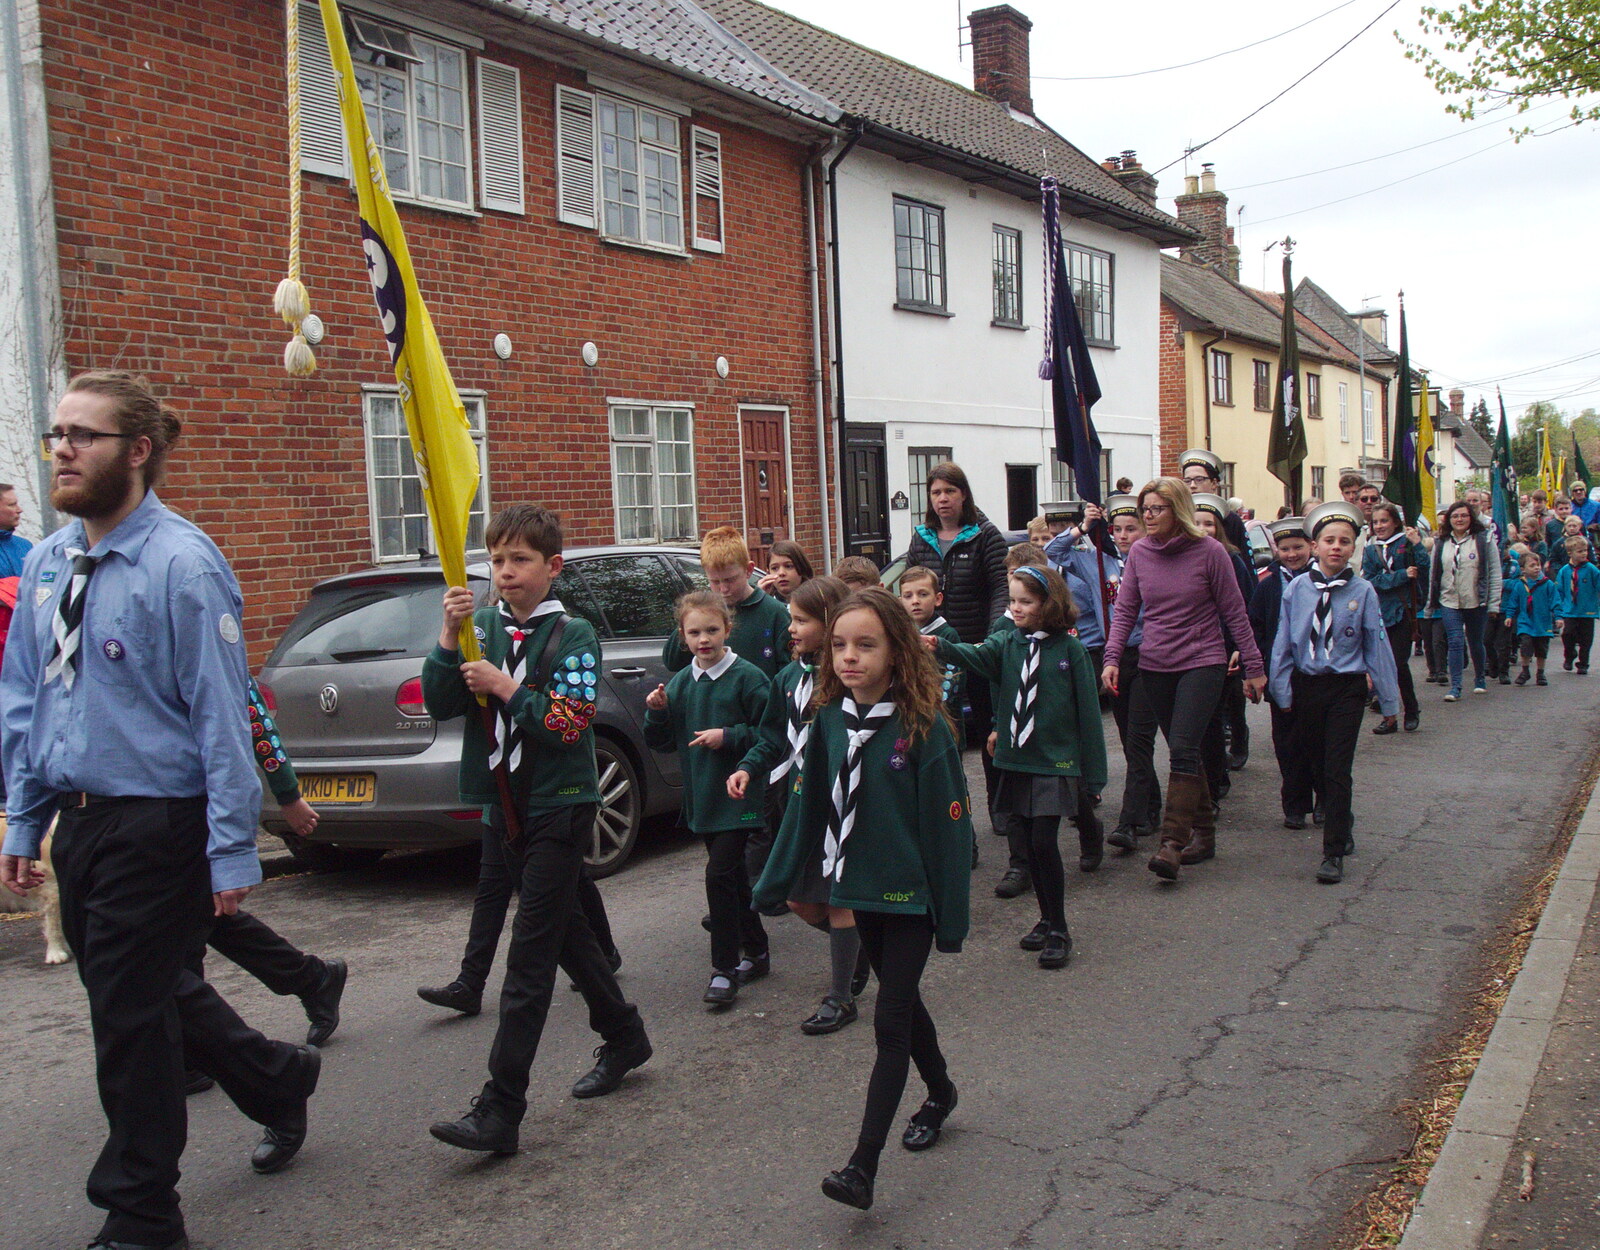 Some more Scouts from A St. George's Day Parade, Dickleburgh, Norfolk - 28th April 2019